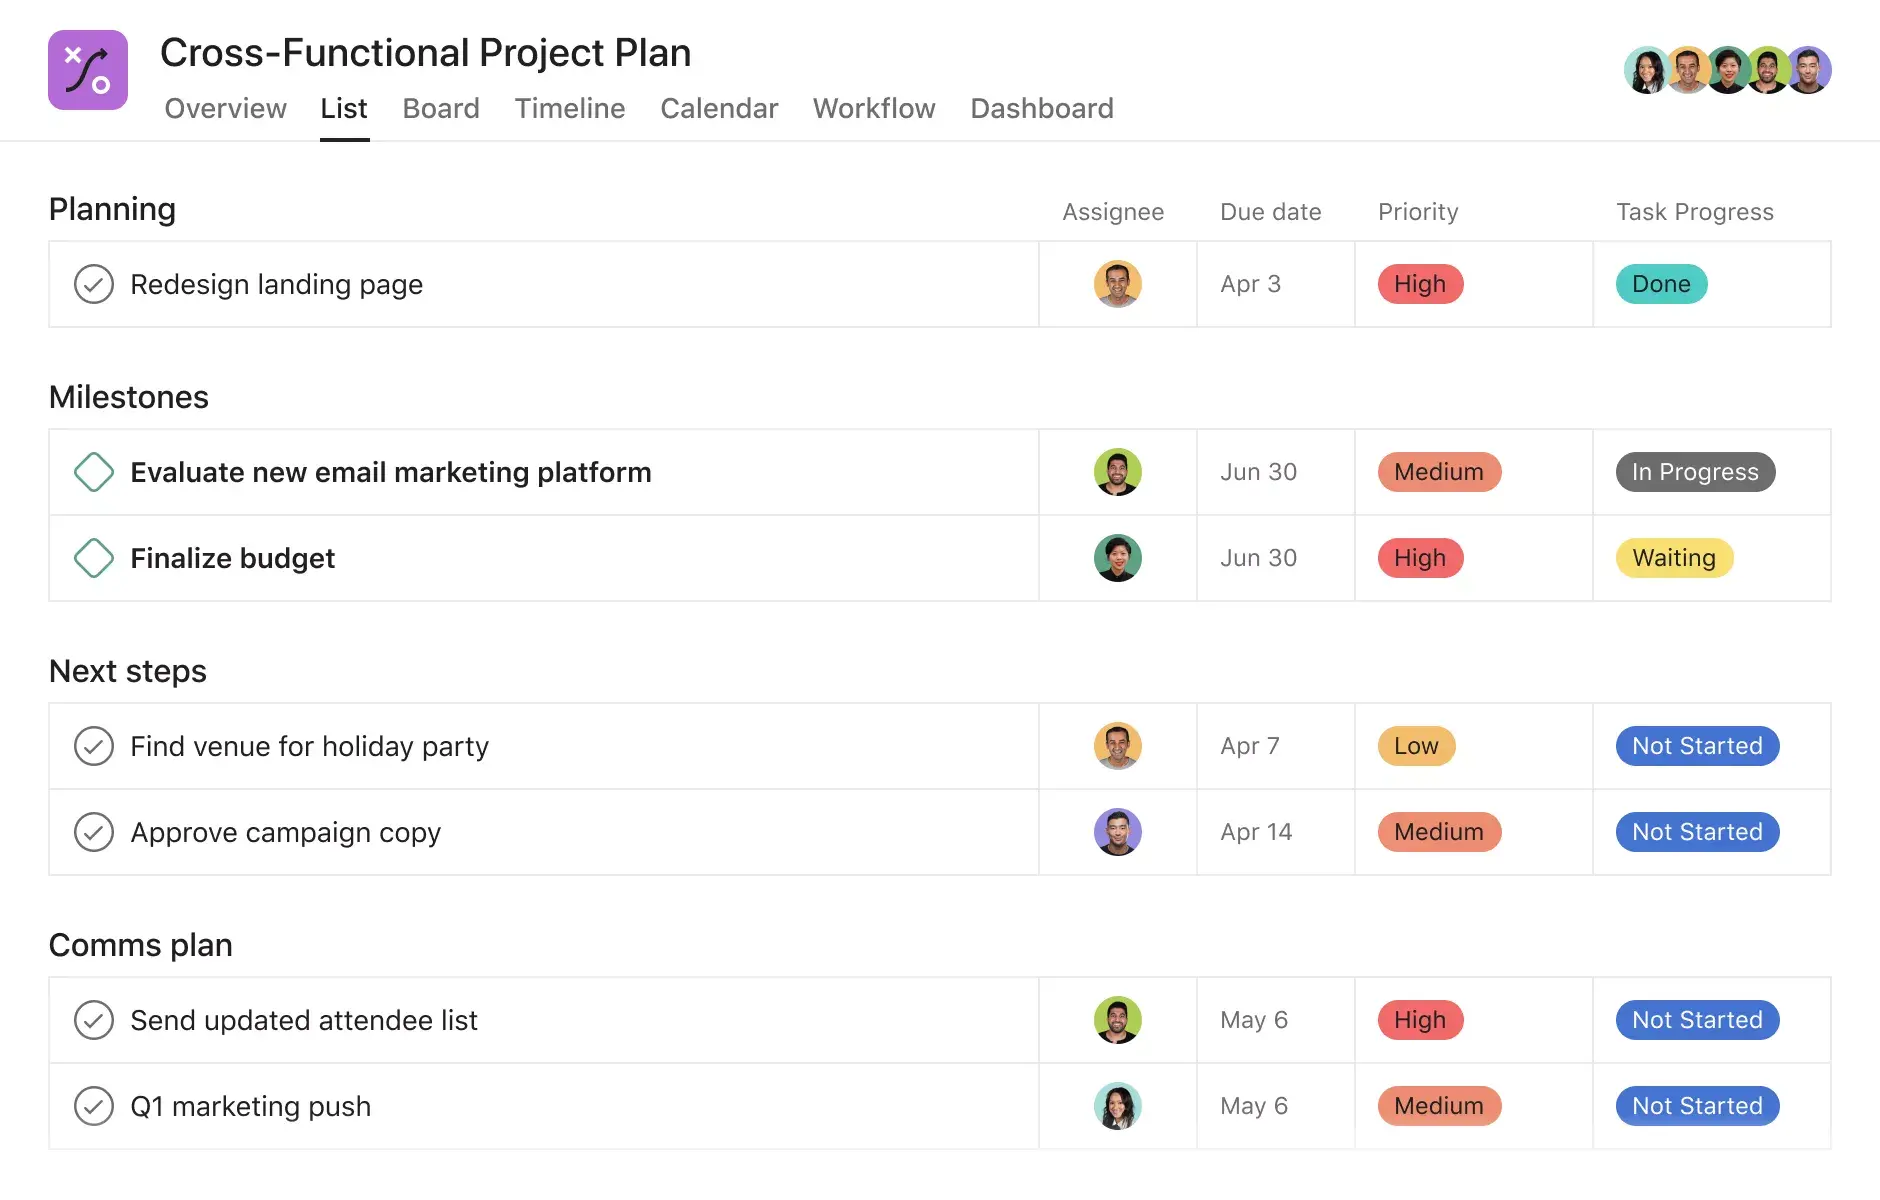 [Product ui] Cross-functional project plan template in Asana, spreadsheet-style project view (List)